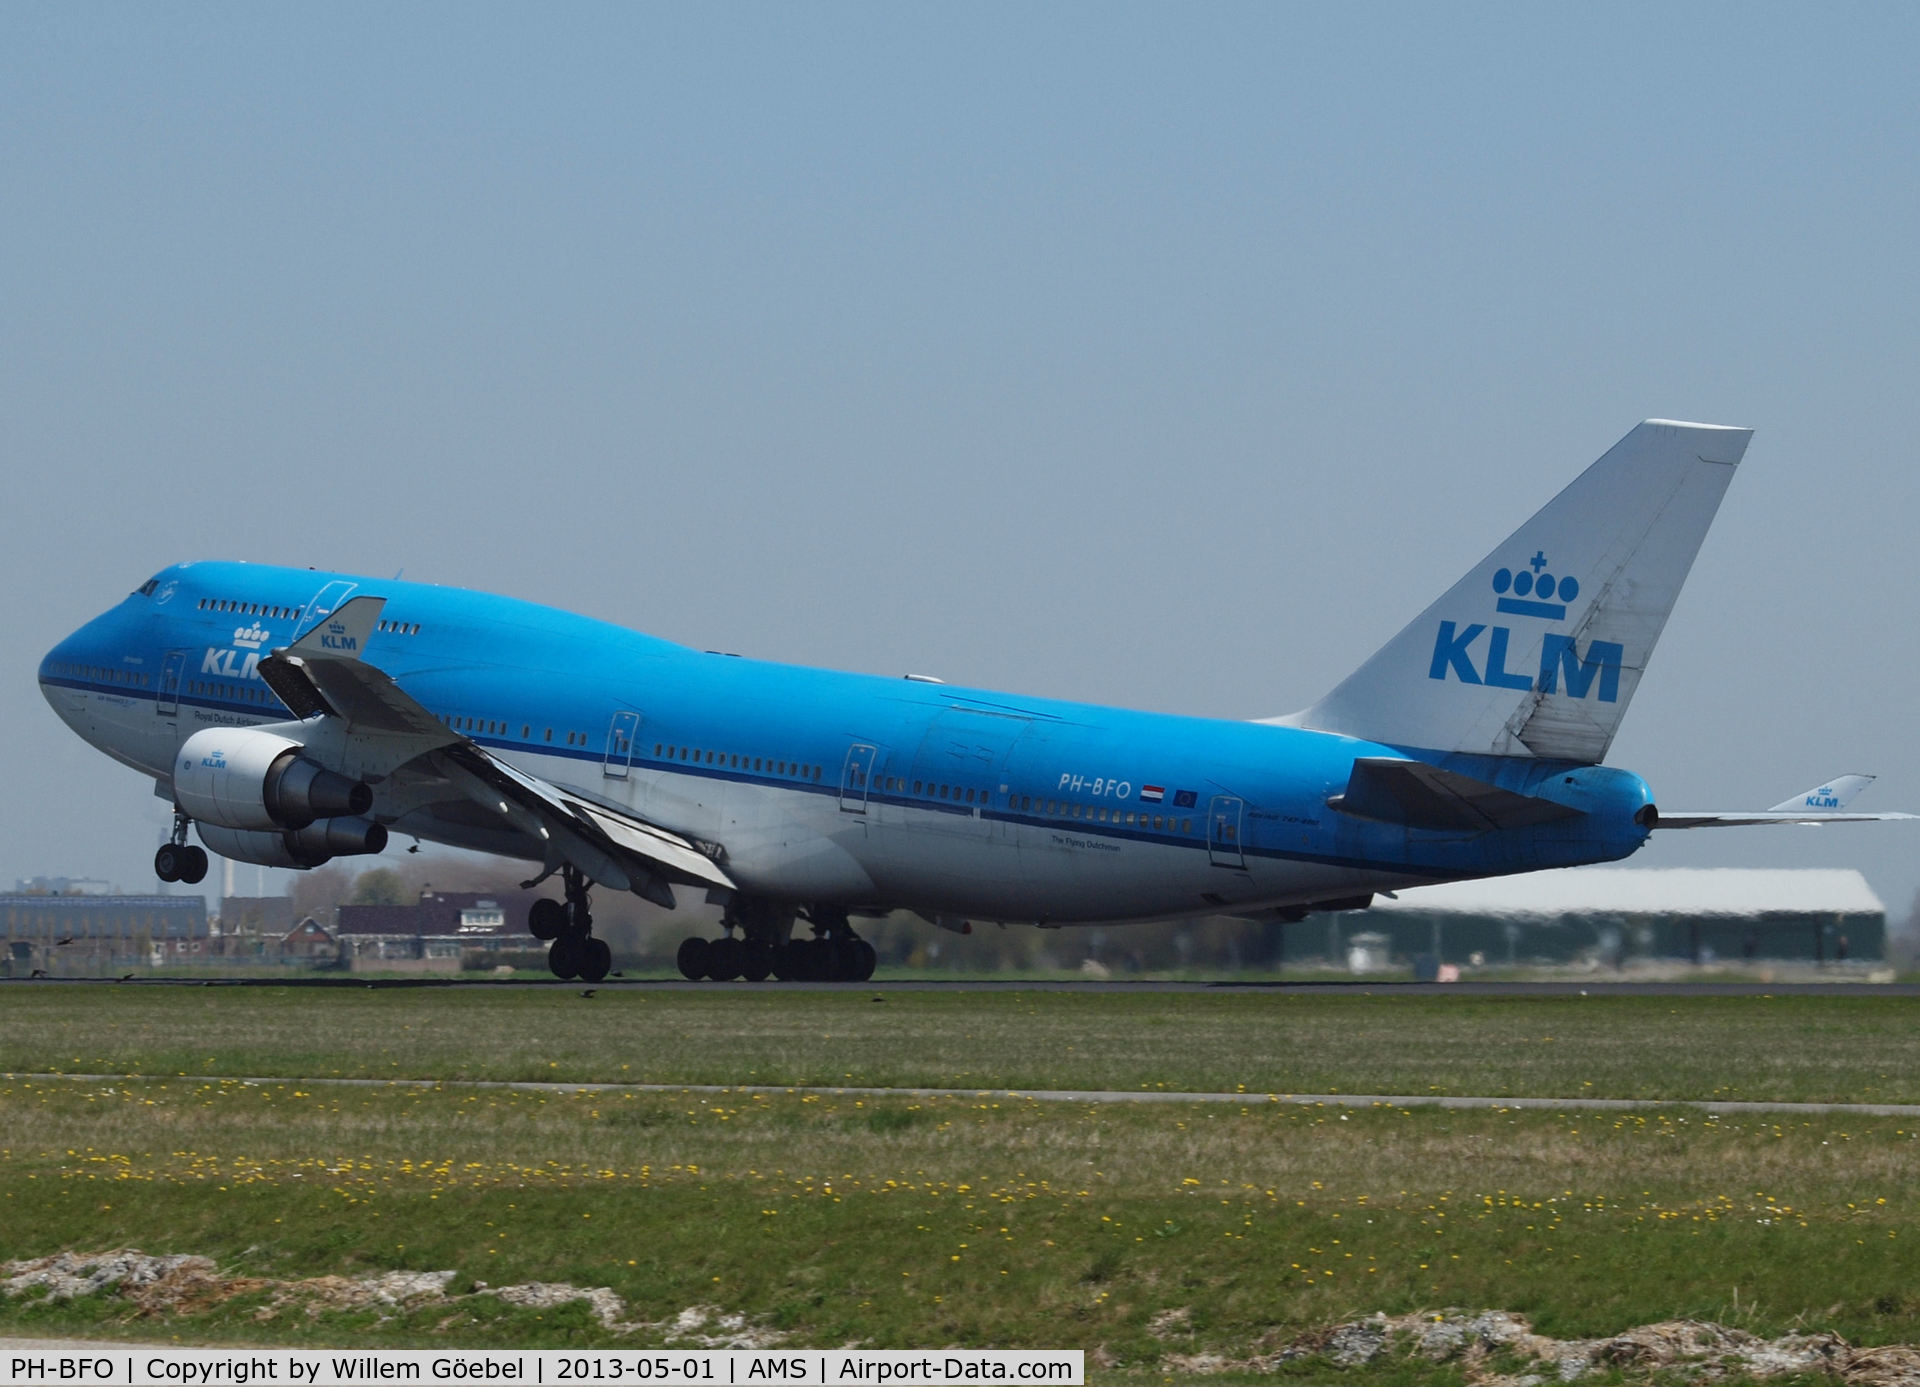 PH-BFO, 1992 Boeing 747-406BC C/N 25413, Take off from runway 36L of Schiphol Airport